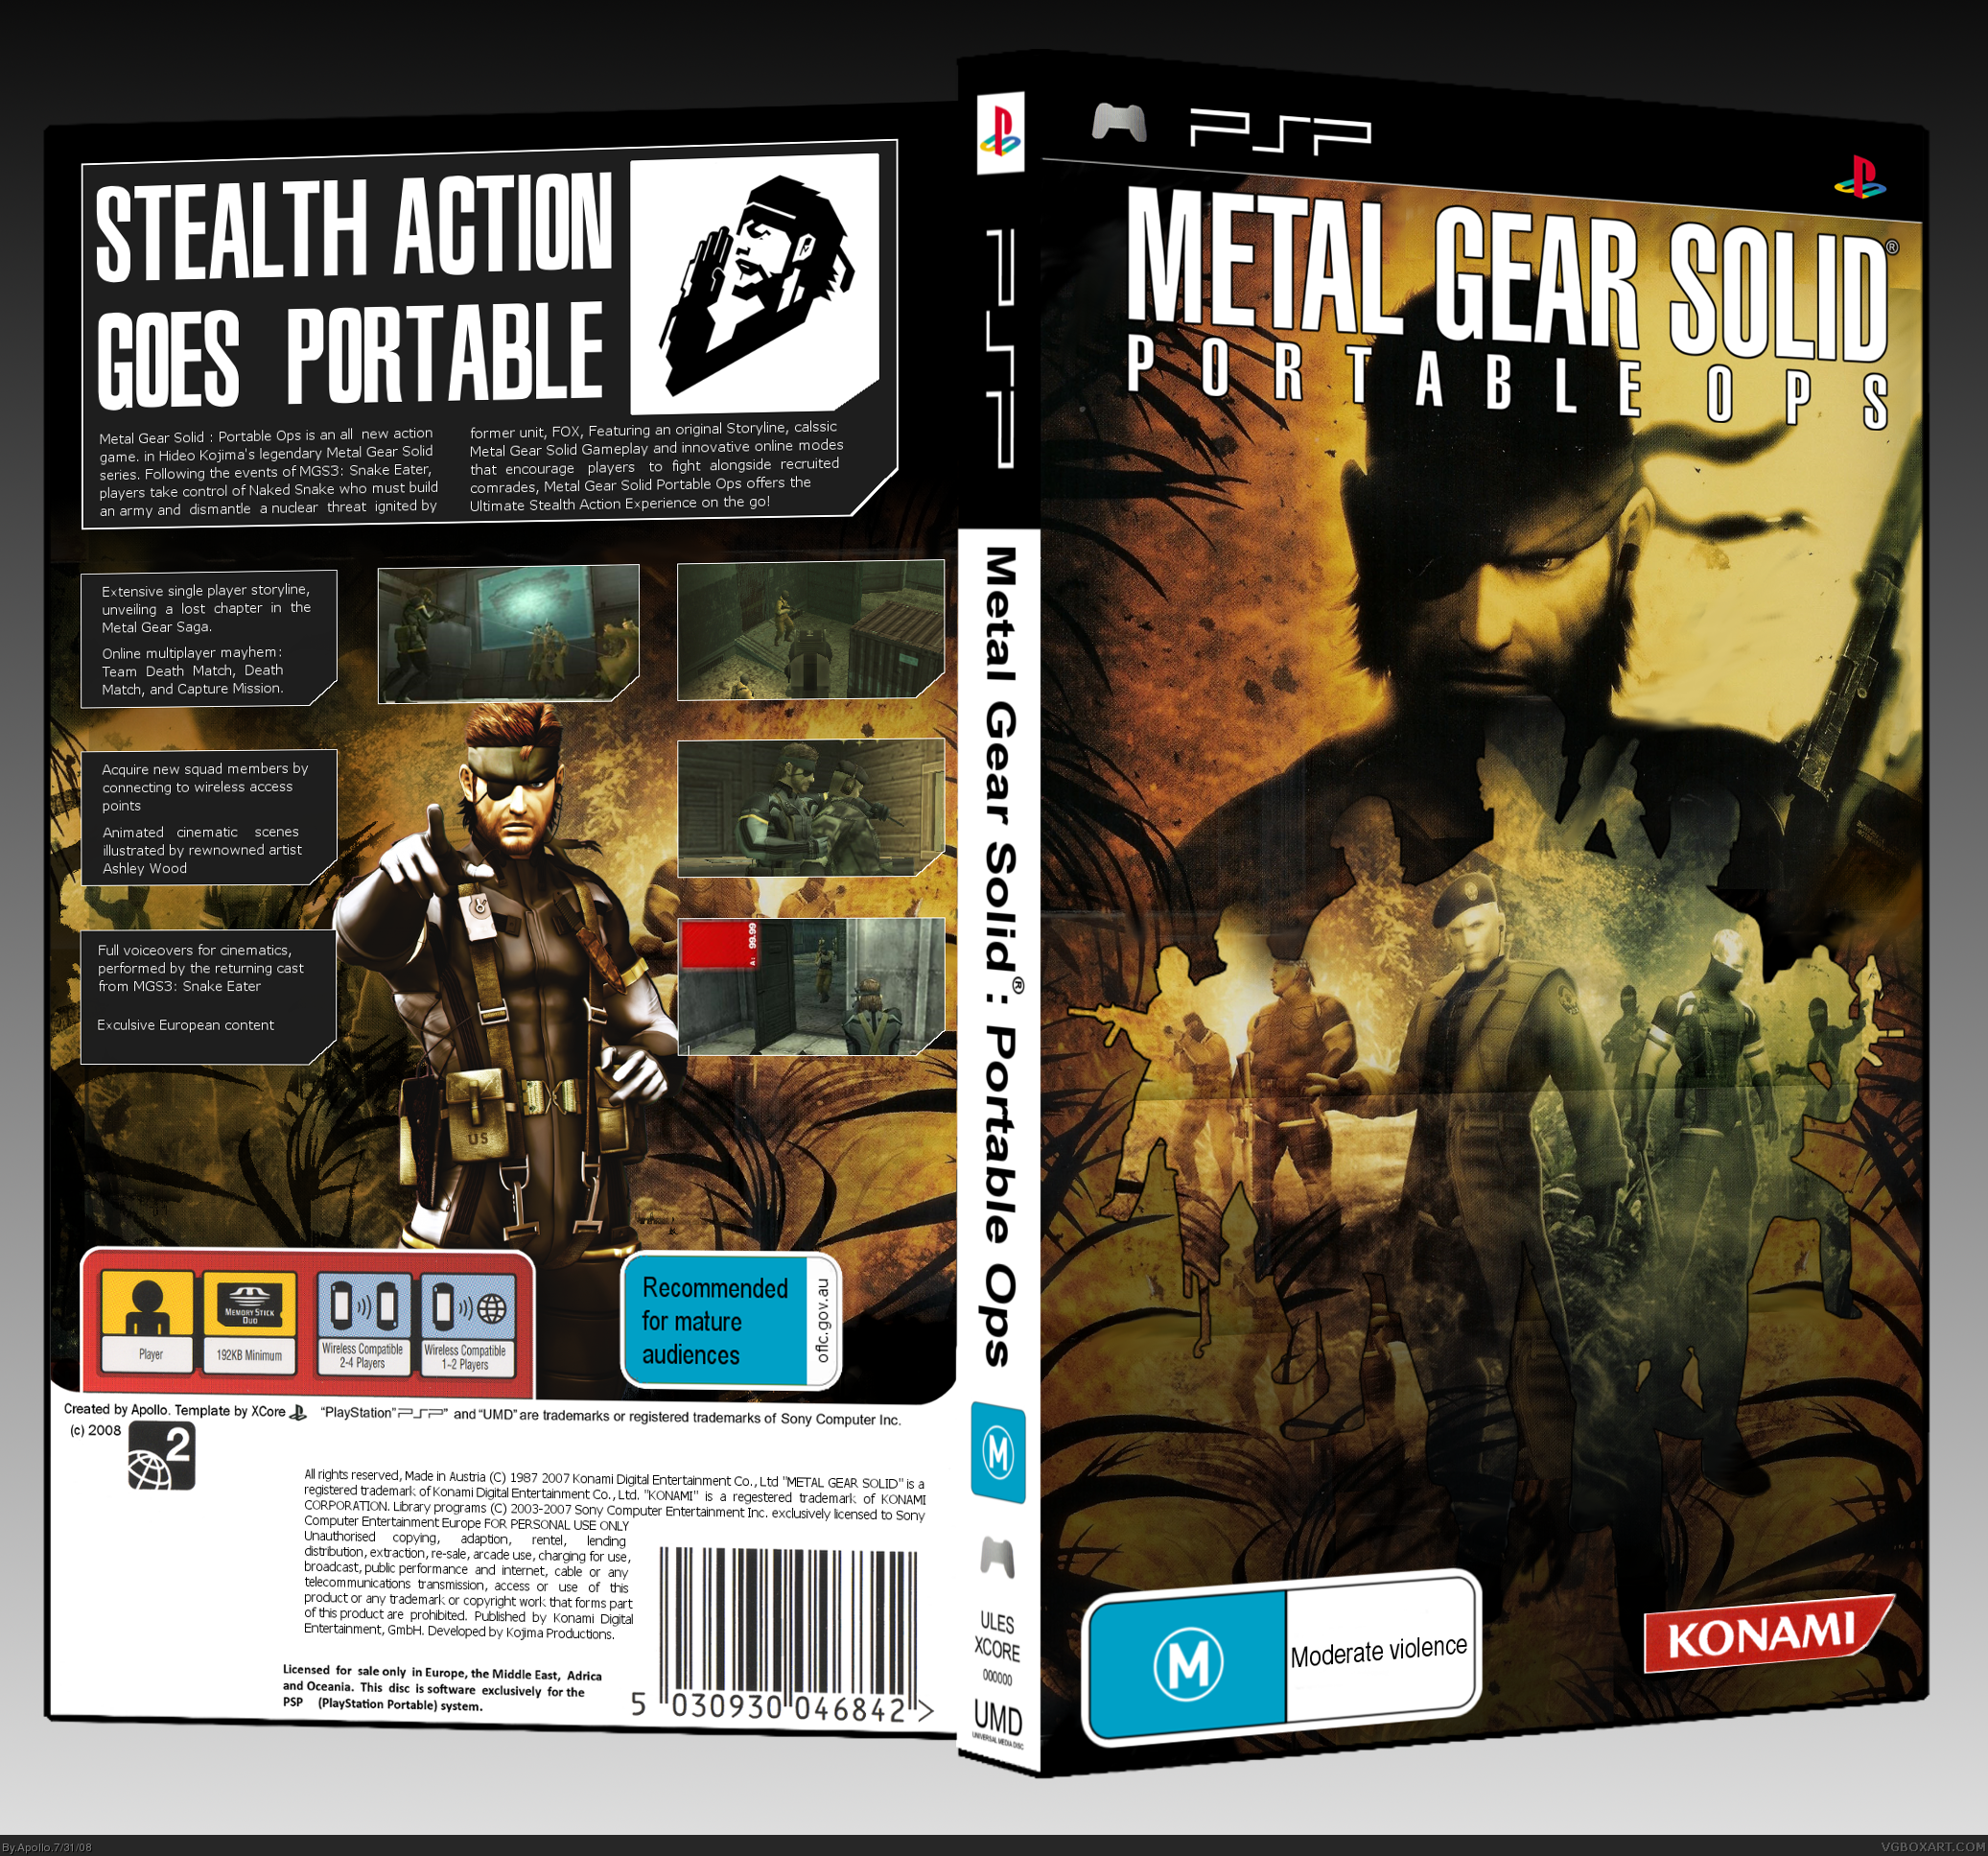 Viewing full size Metal Gear Solid: Portable Ops box cover